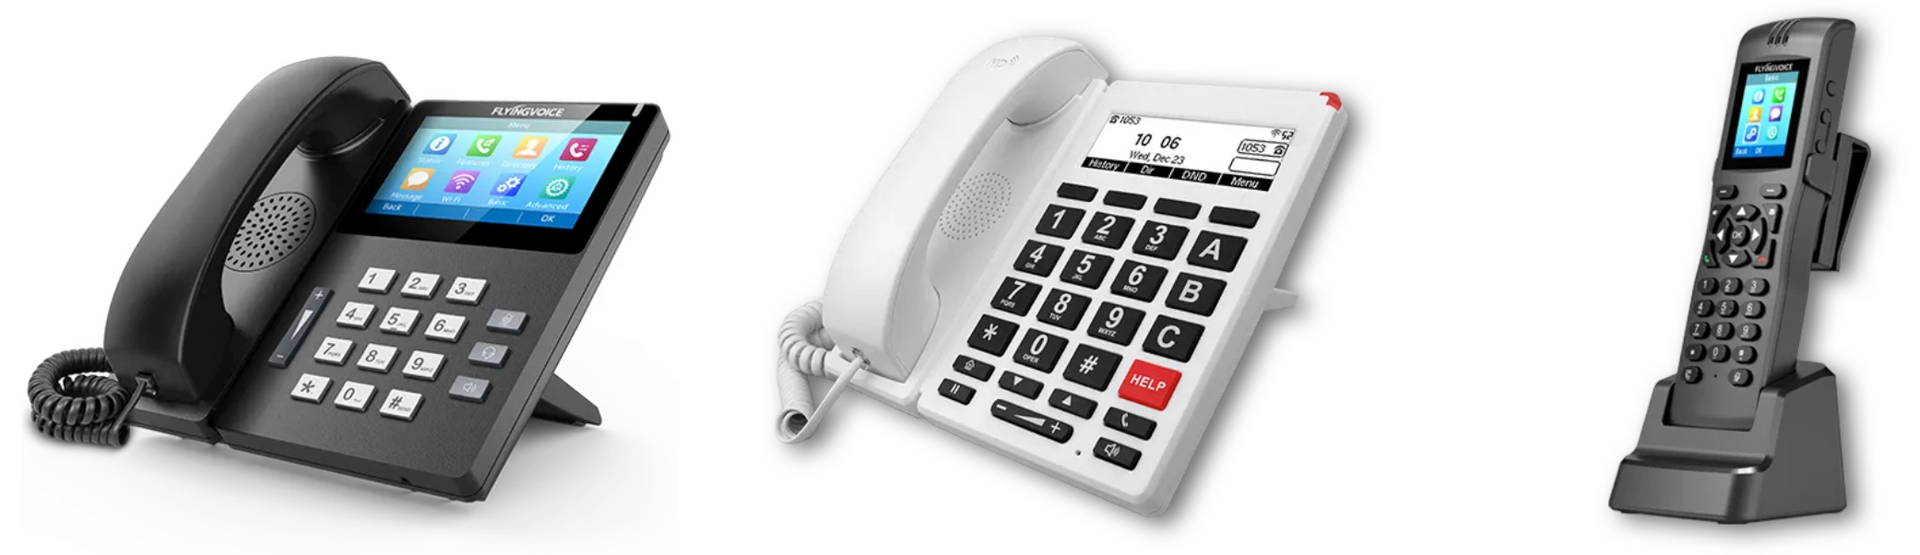 Advanced VoIP Phones With Wi-Fi